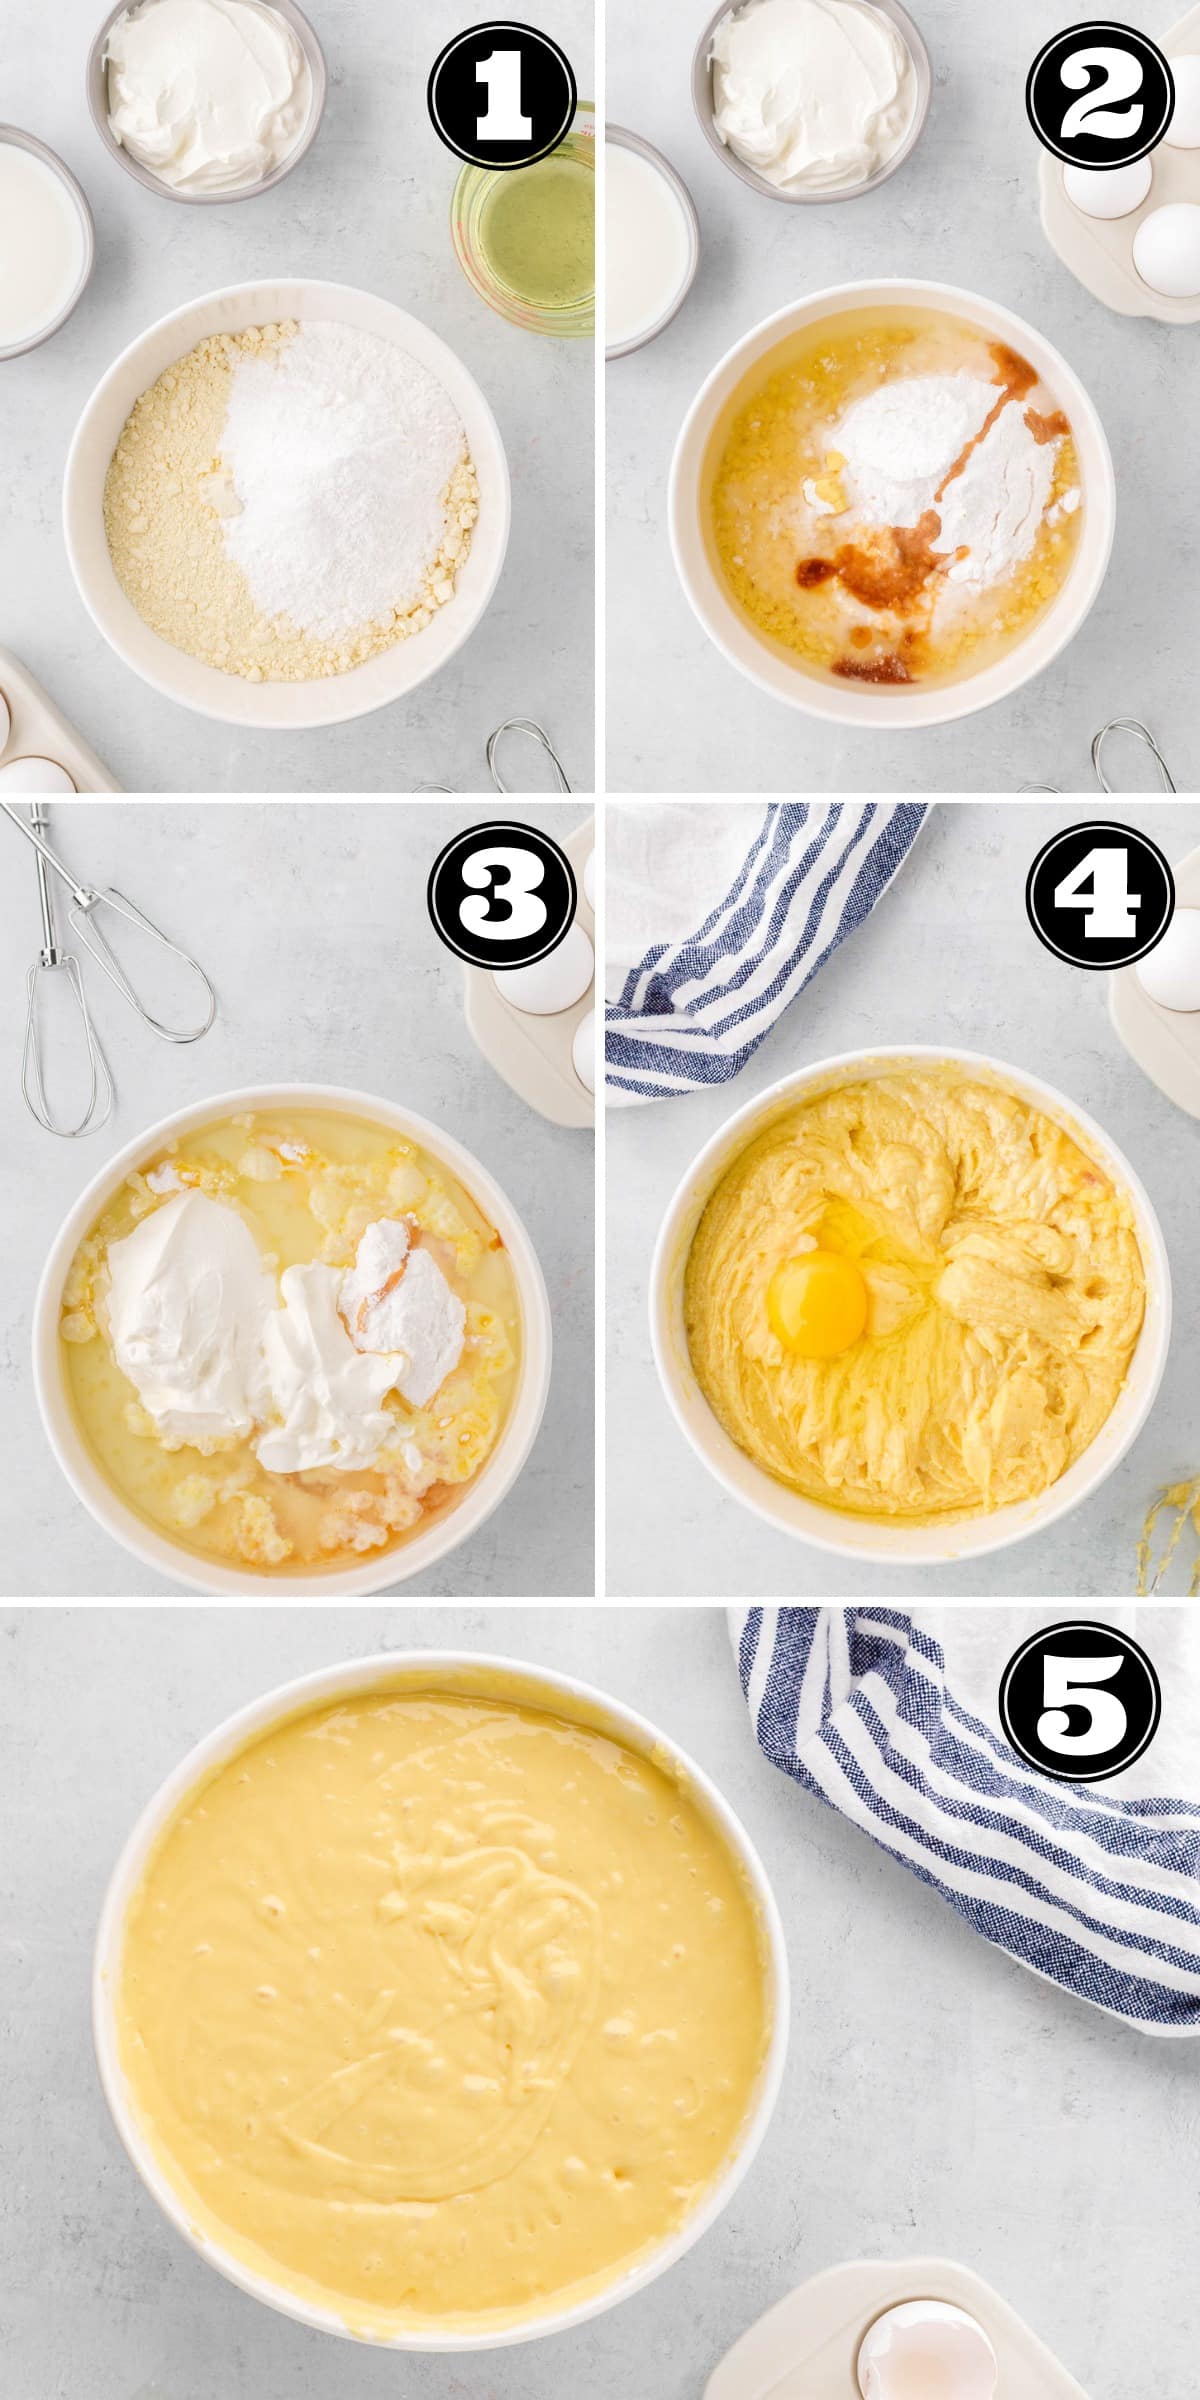 Collage image showing adding cake batter ingredients to a bowl and mixing until combined.